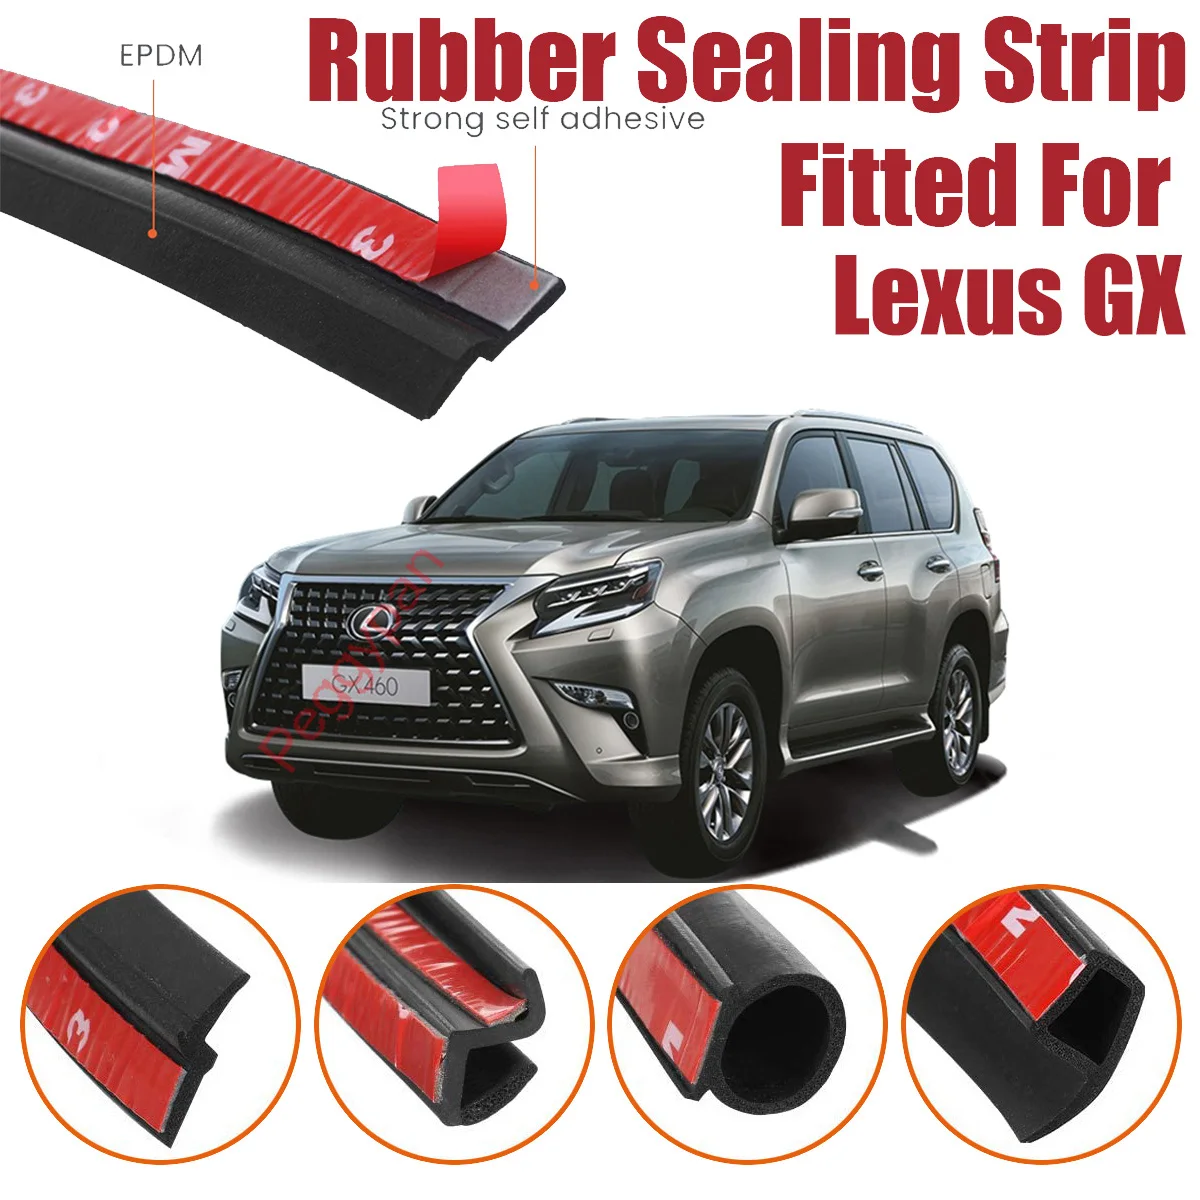 Door Seal Strip Kit Self Adhesive Window Engine Cover Soundproof Rubber Weather Draft Wind Noise Reduction For Lexus GX